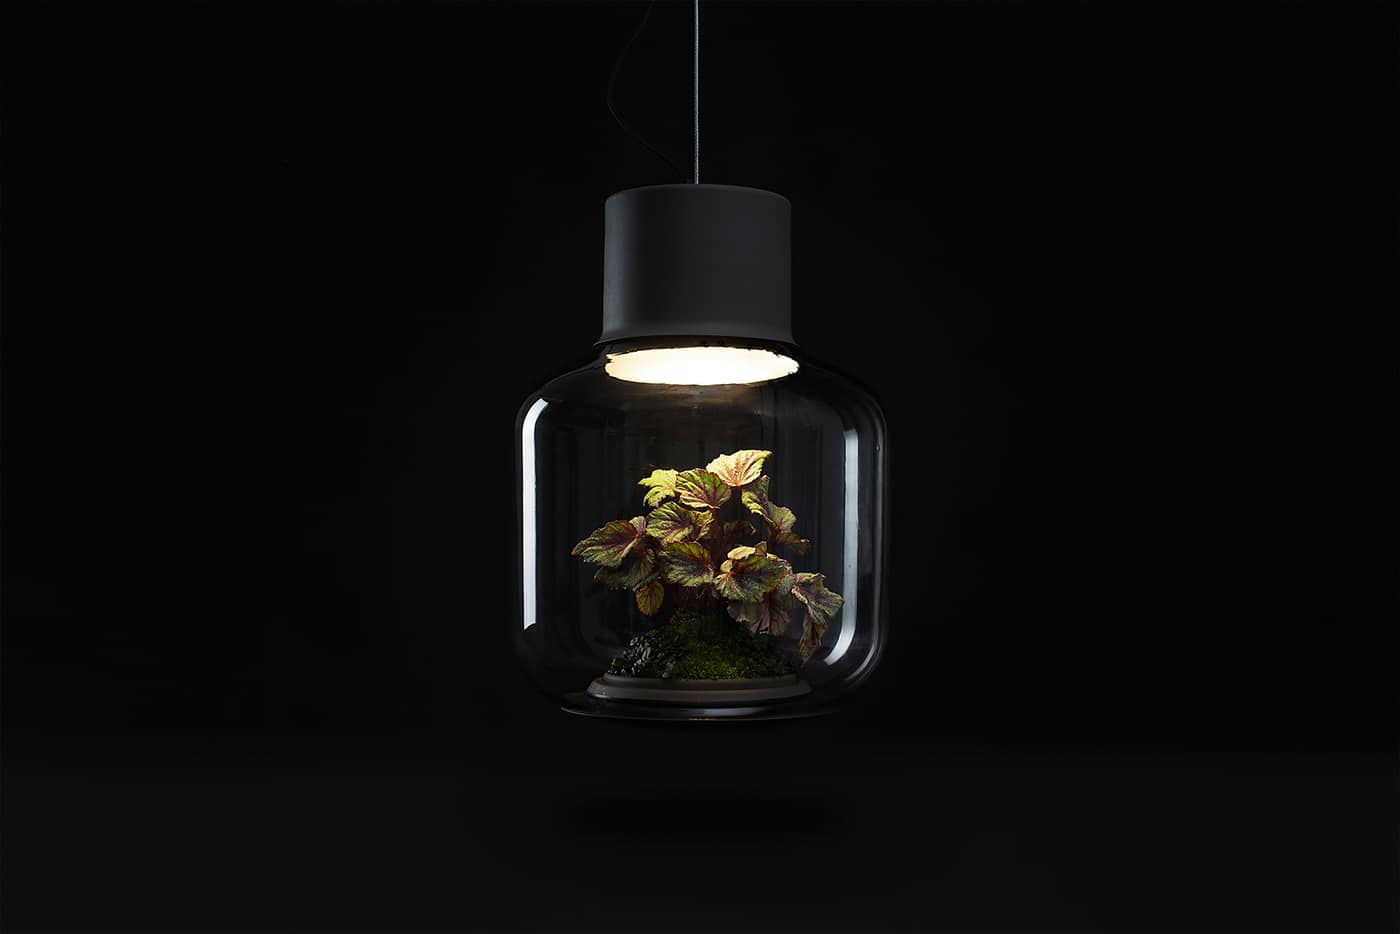 plant-lamps-with-natural-light-awesome-9.jpg